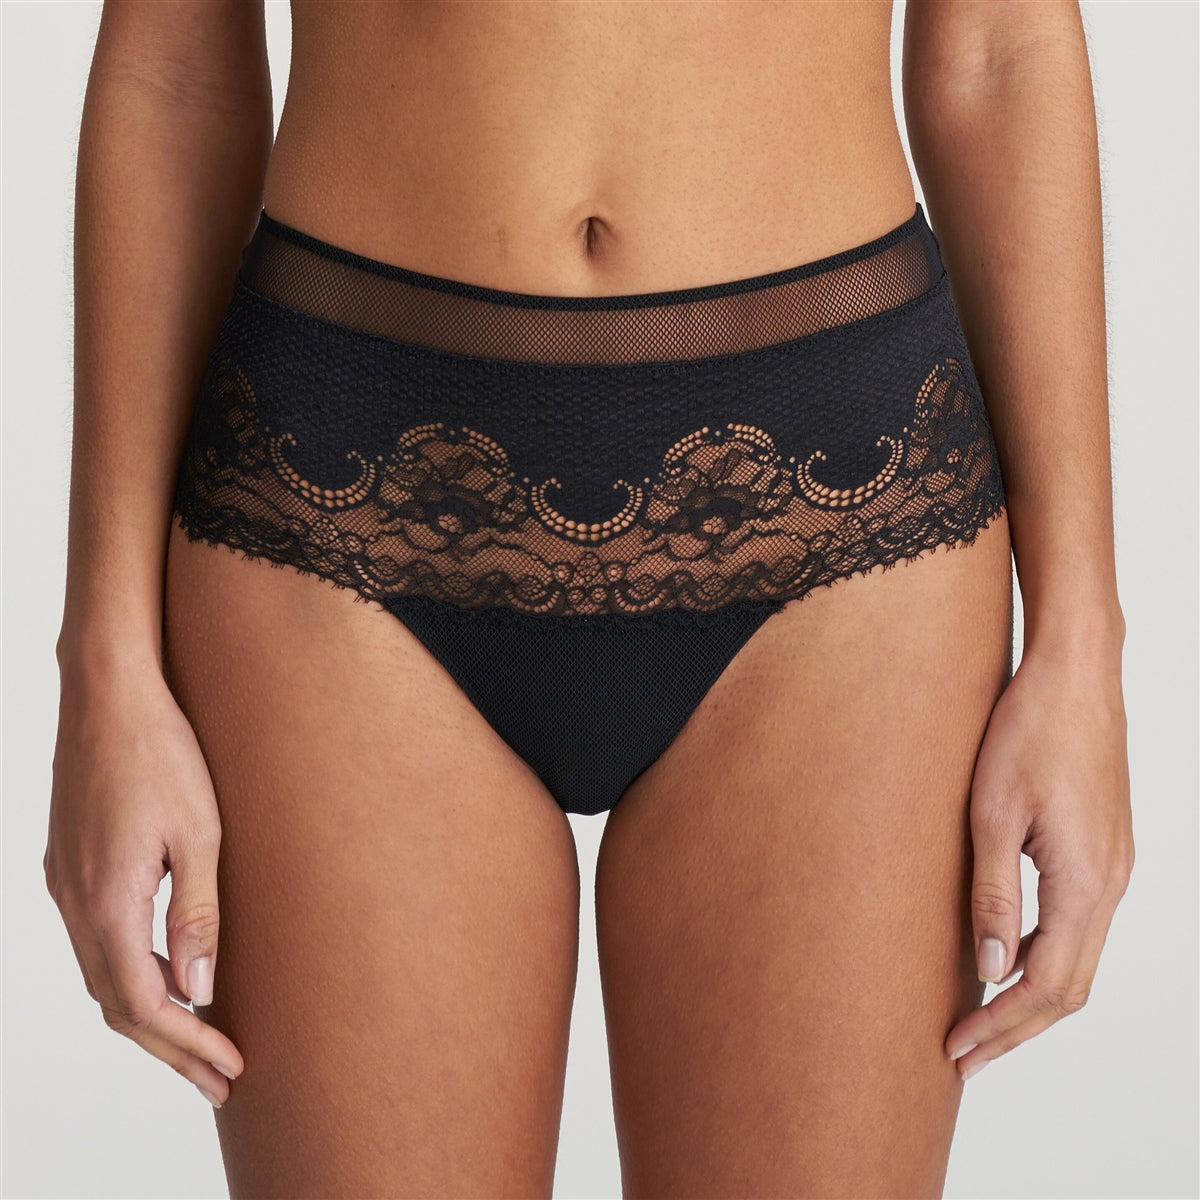 Black hotpants with soft mesh-look lace and subtle snakeskin print